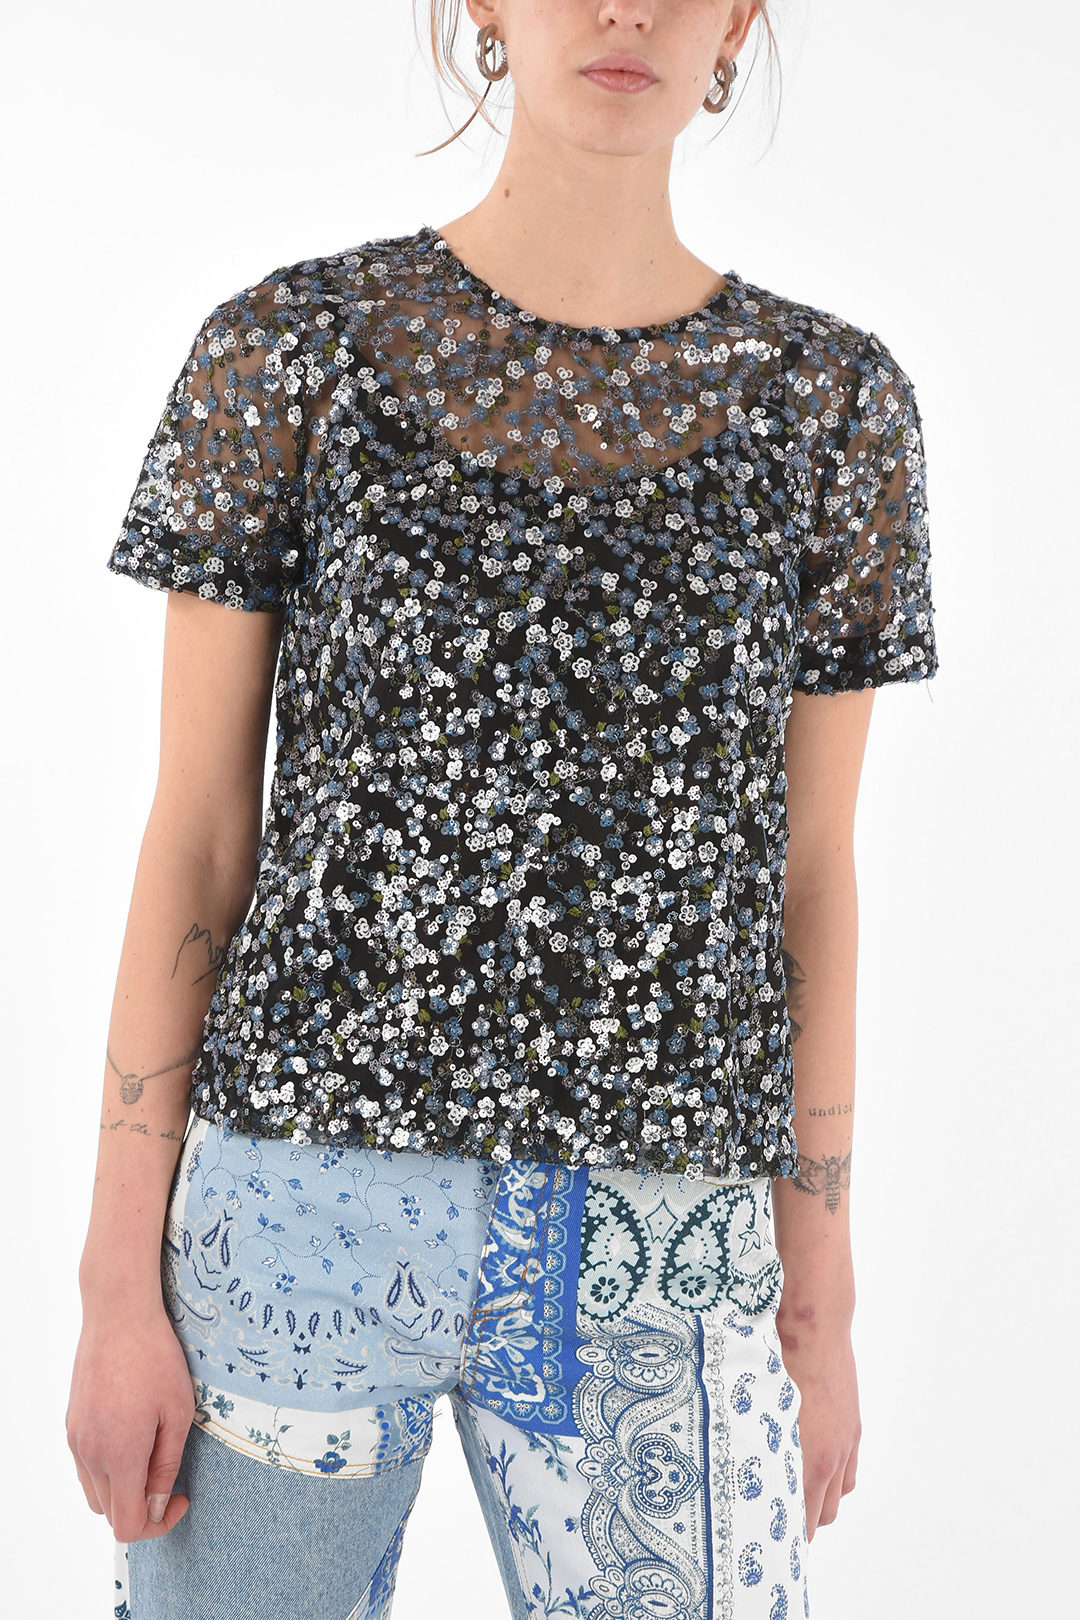 Michael Kors All-Over Sequined Embroidered Mesh Top women - Glamood Outlet